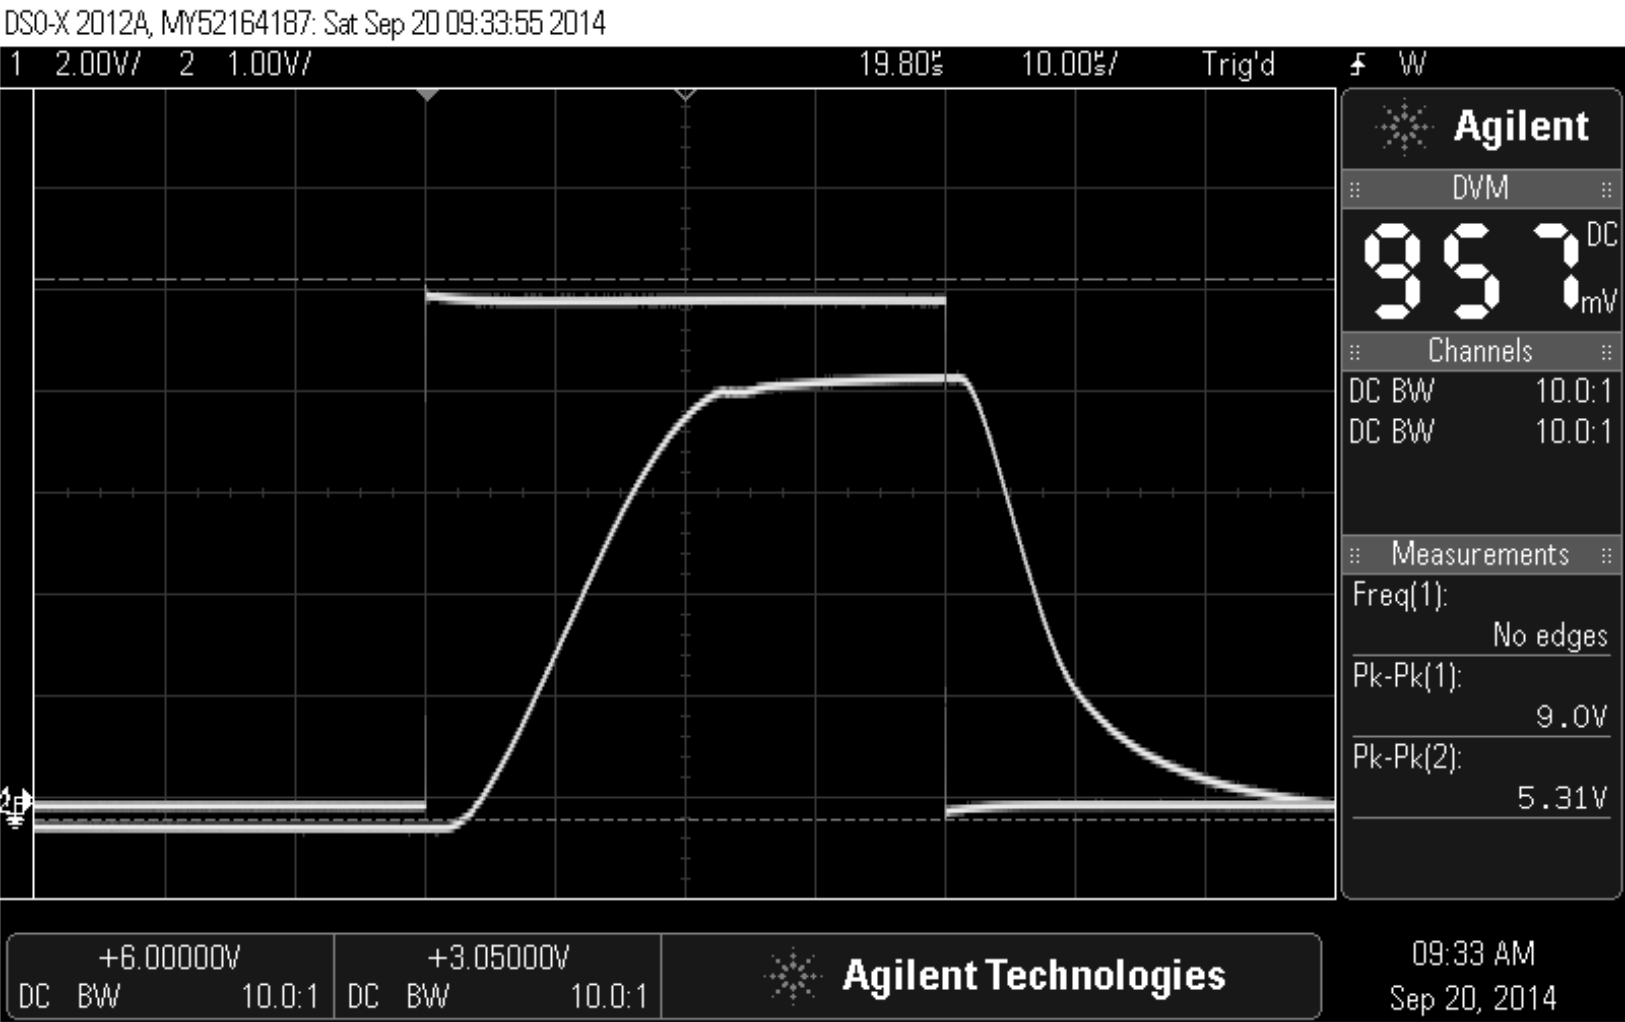 Oscilloscope capture showing a 20 microsecond envelope response